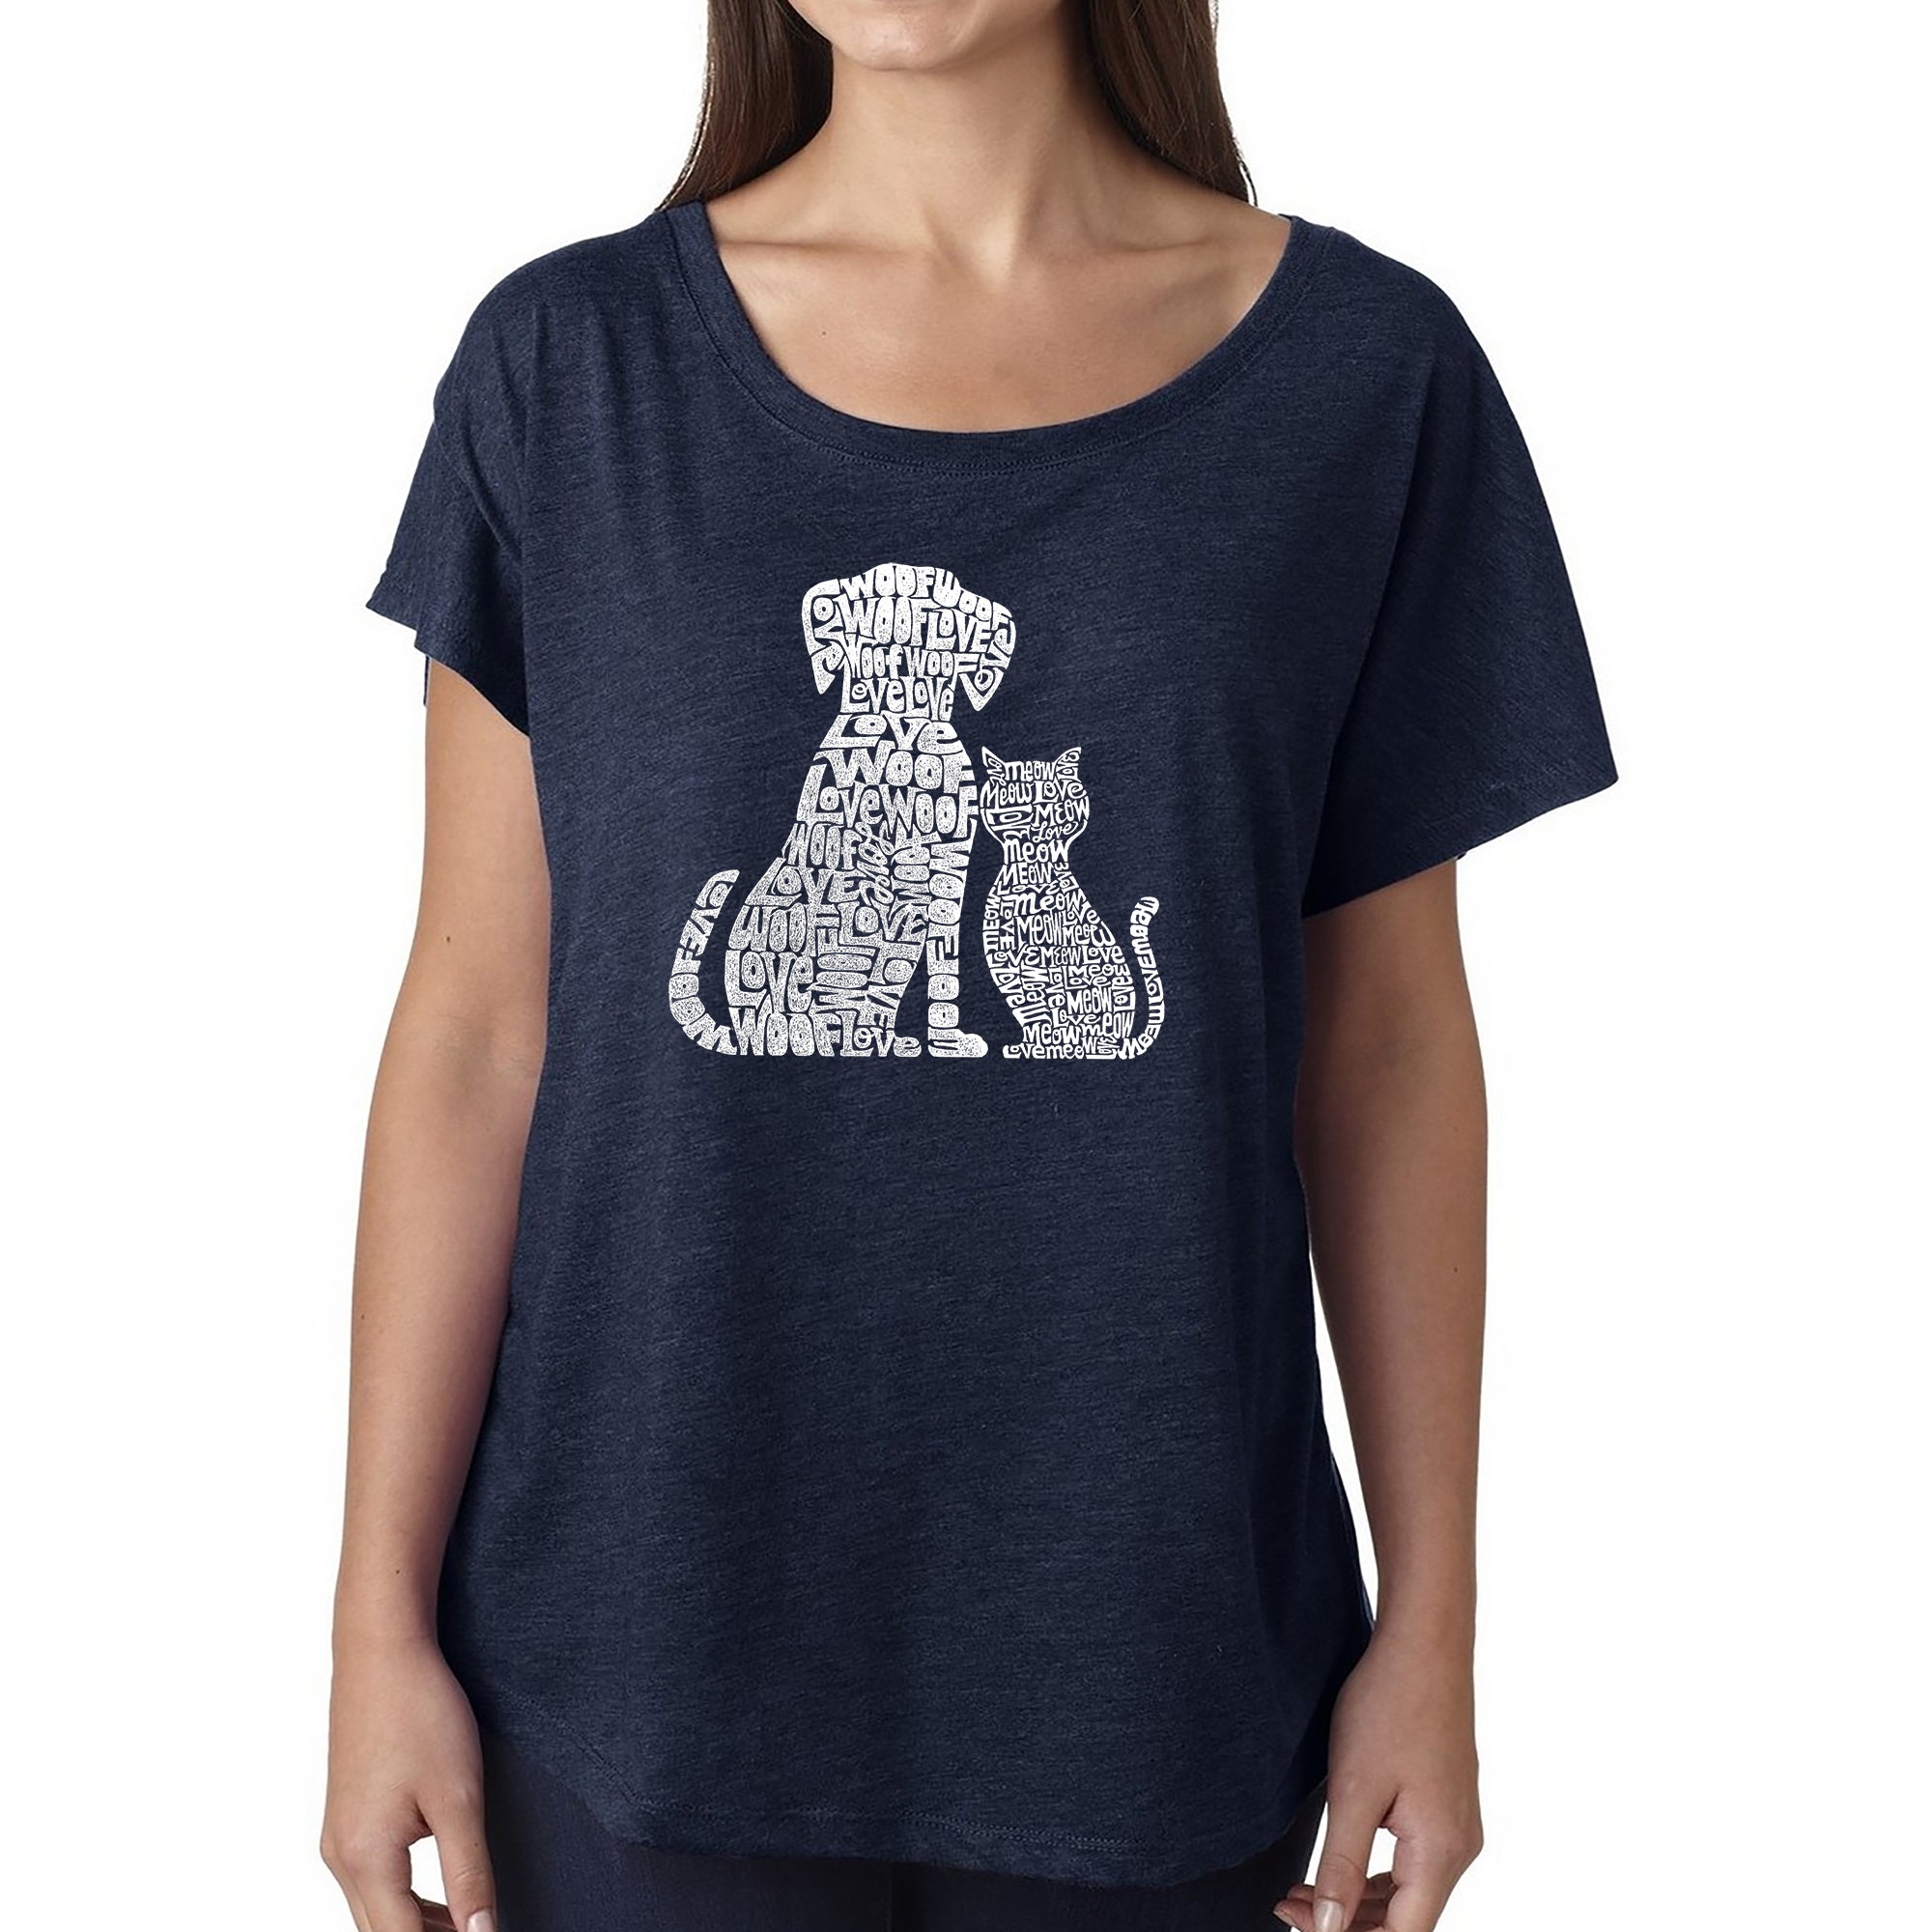 Dogs And Cats - Women's Loose Fit Dolman Cut Word Art Shirt - Navy - X-Large